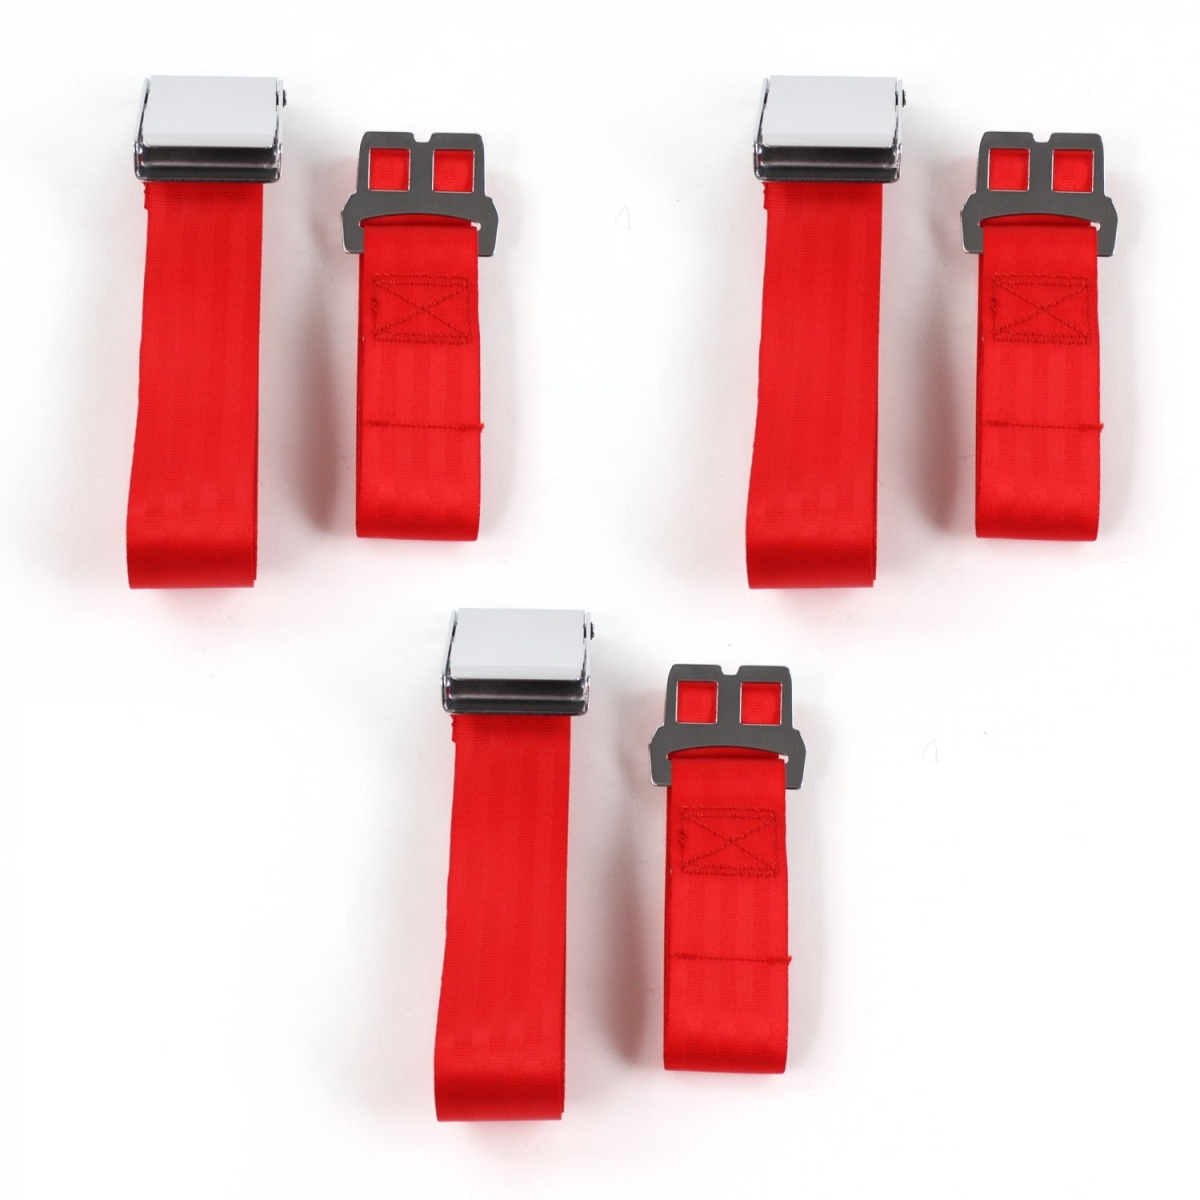 662068 Chevy Chevelle 1964-1967 Airplane 2 Point Red Lap Bench Seat Belt Kit - 3 Belts -  safeTboy